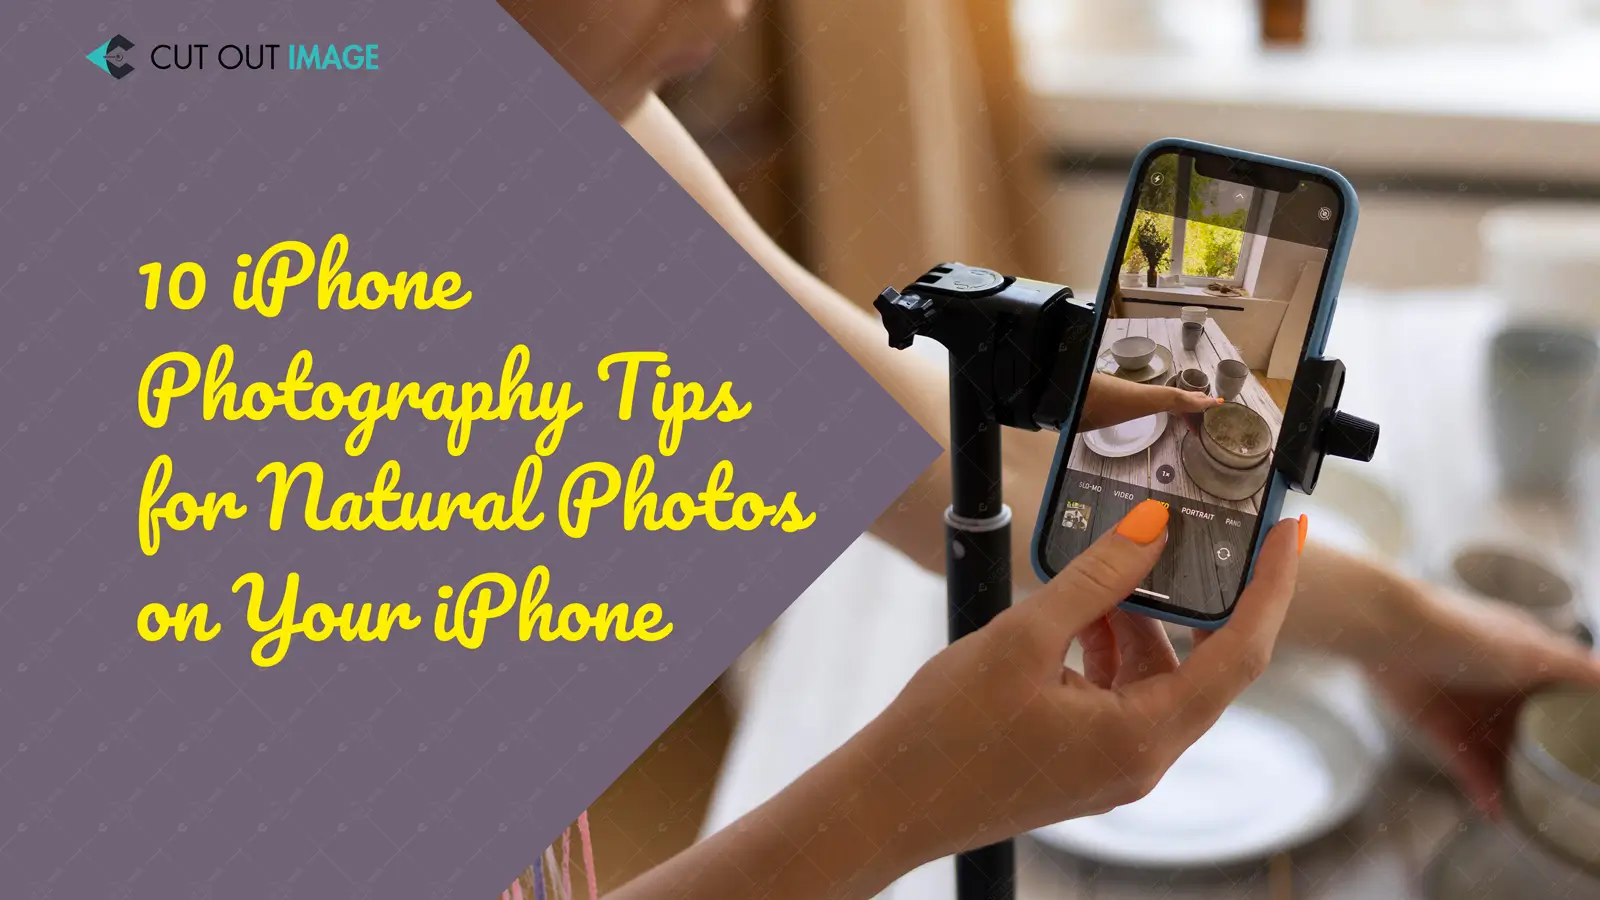 10 iPhone Photography Tips for Natural Photos on Your iPhone